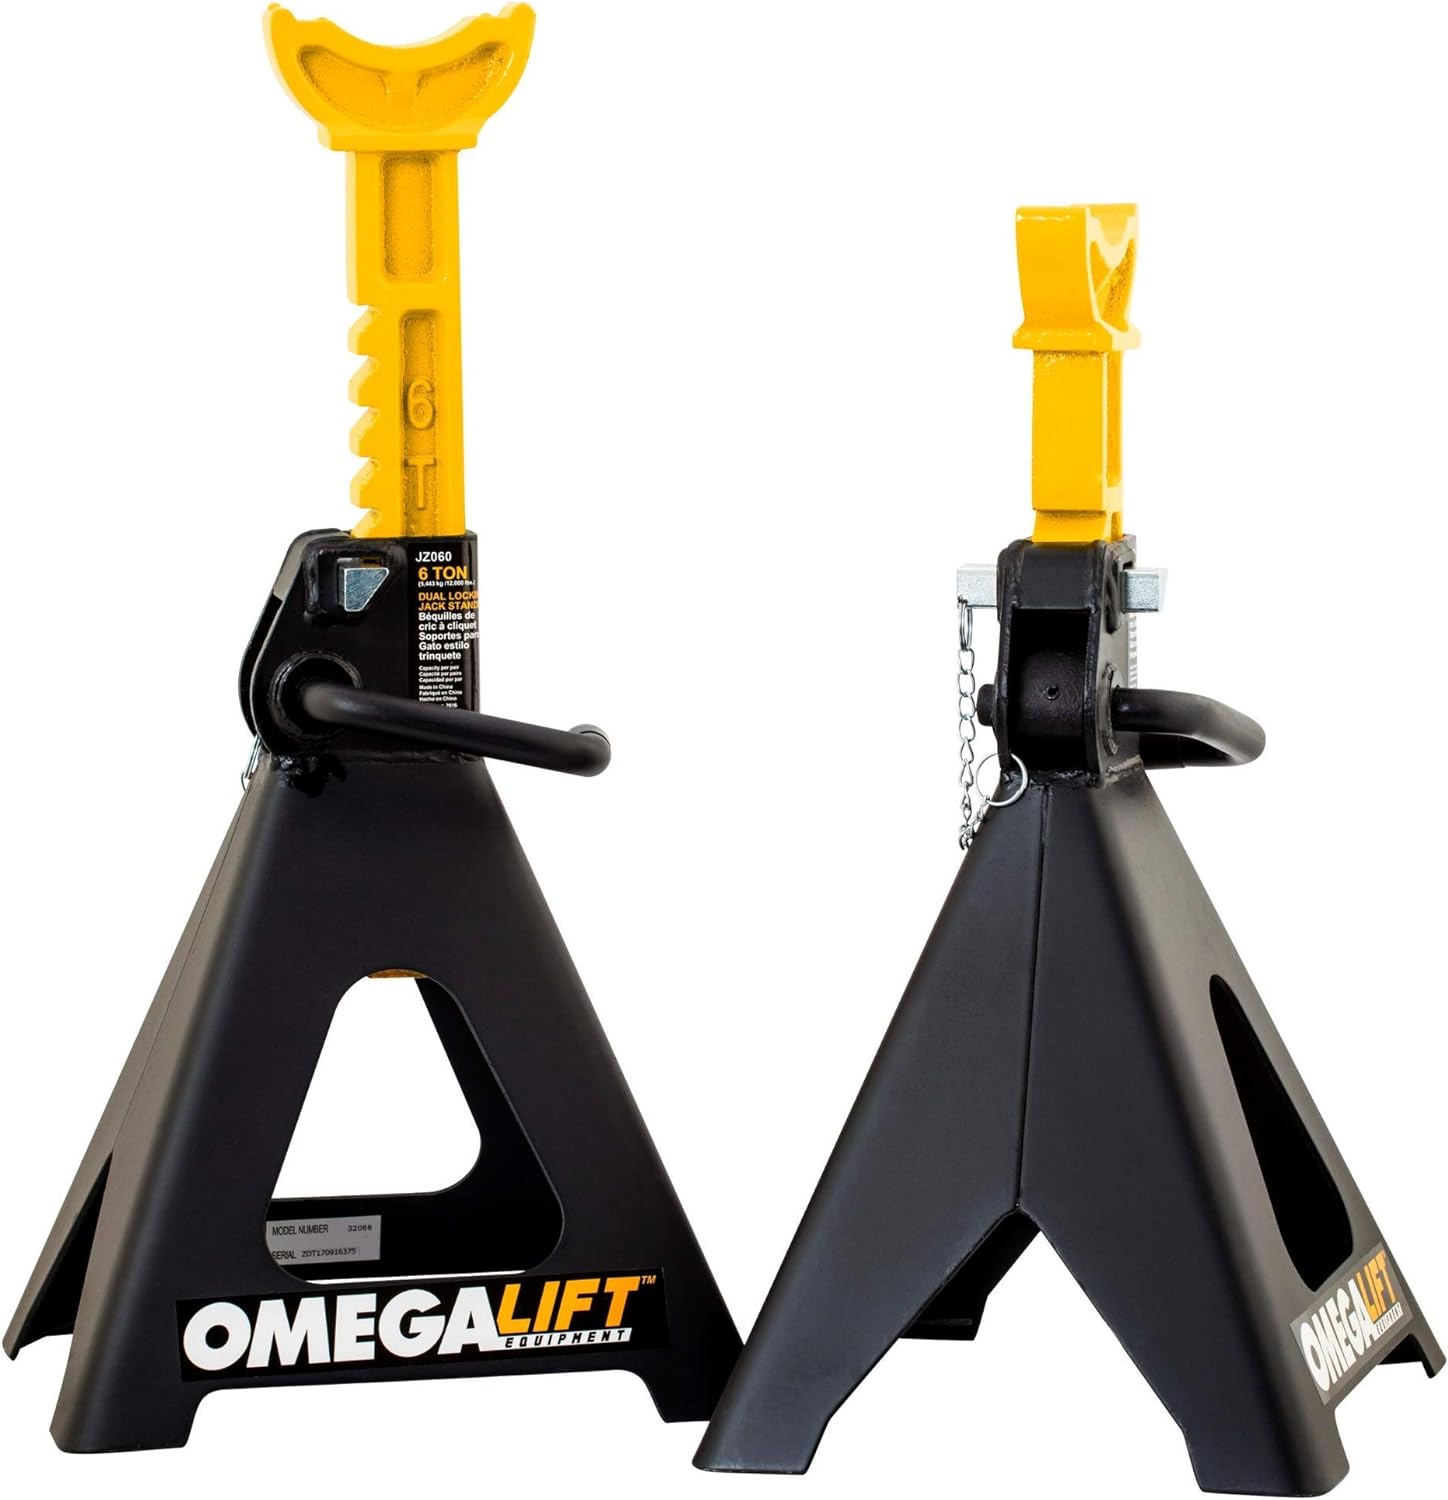 Omega Lift Heavy Duty 6 Ton Jack Stands Pair - Double Locking Pins - Handle Lock and Mobility Pin for Auto Repair Shop with Extra Safety (